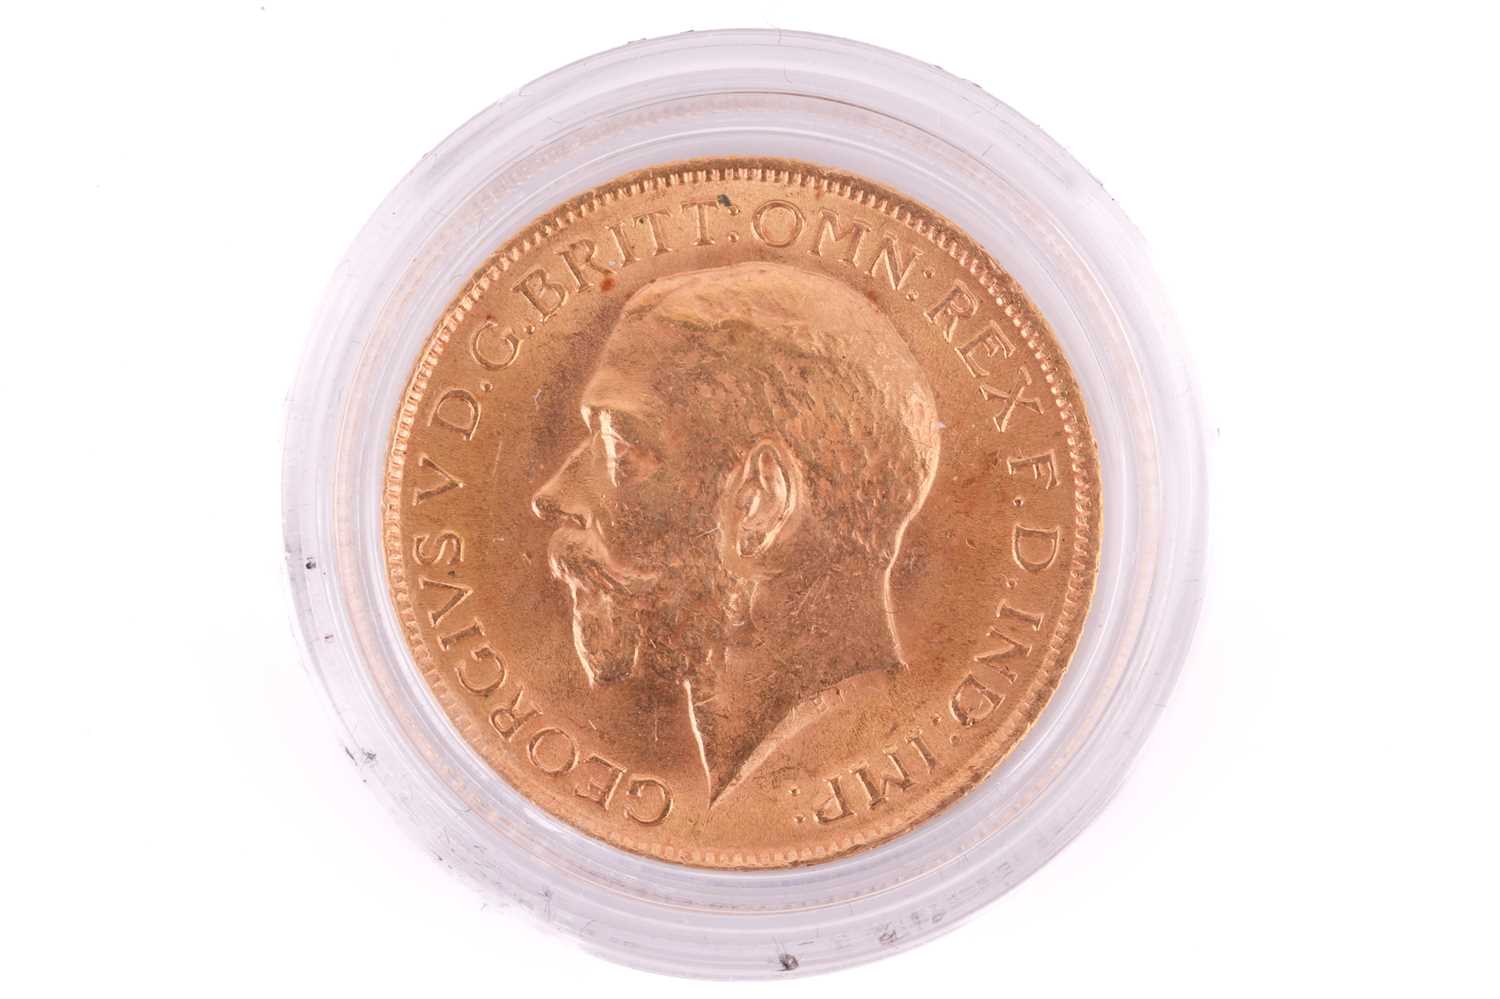 A 1915 George V Full-Sovereign with a plastic case, circulated. - Image 2 of 2